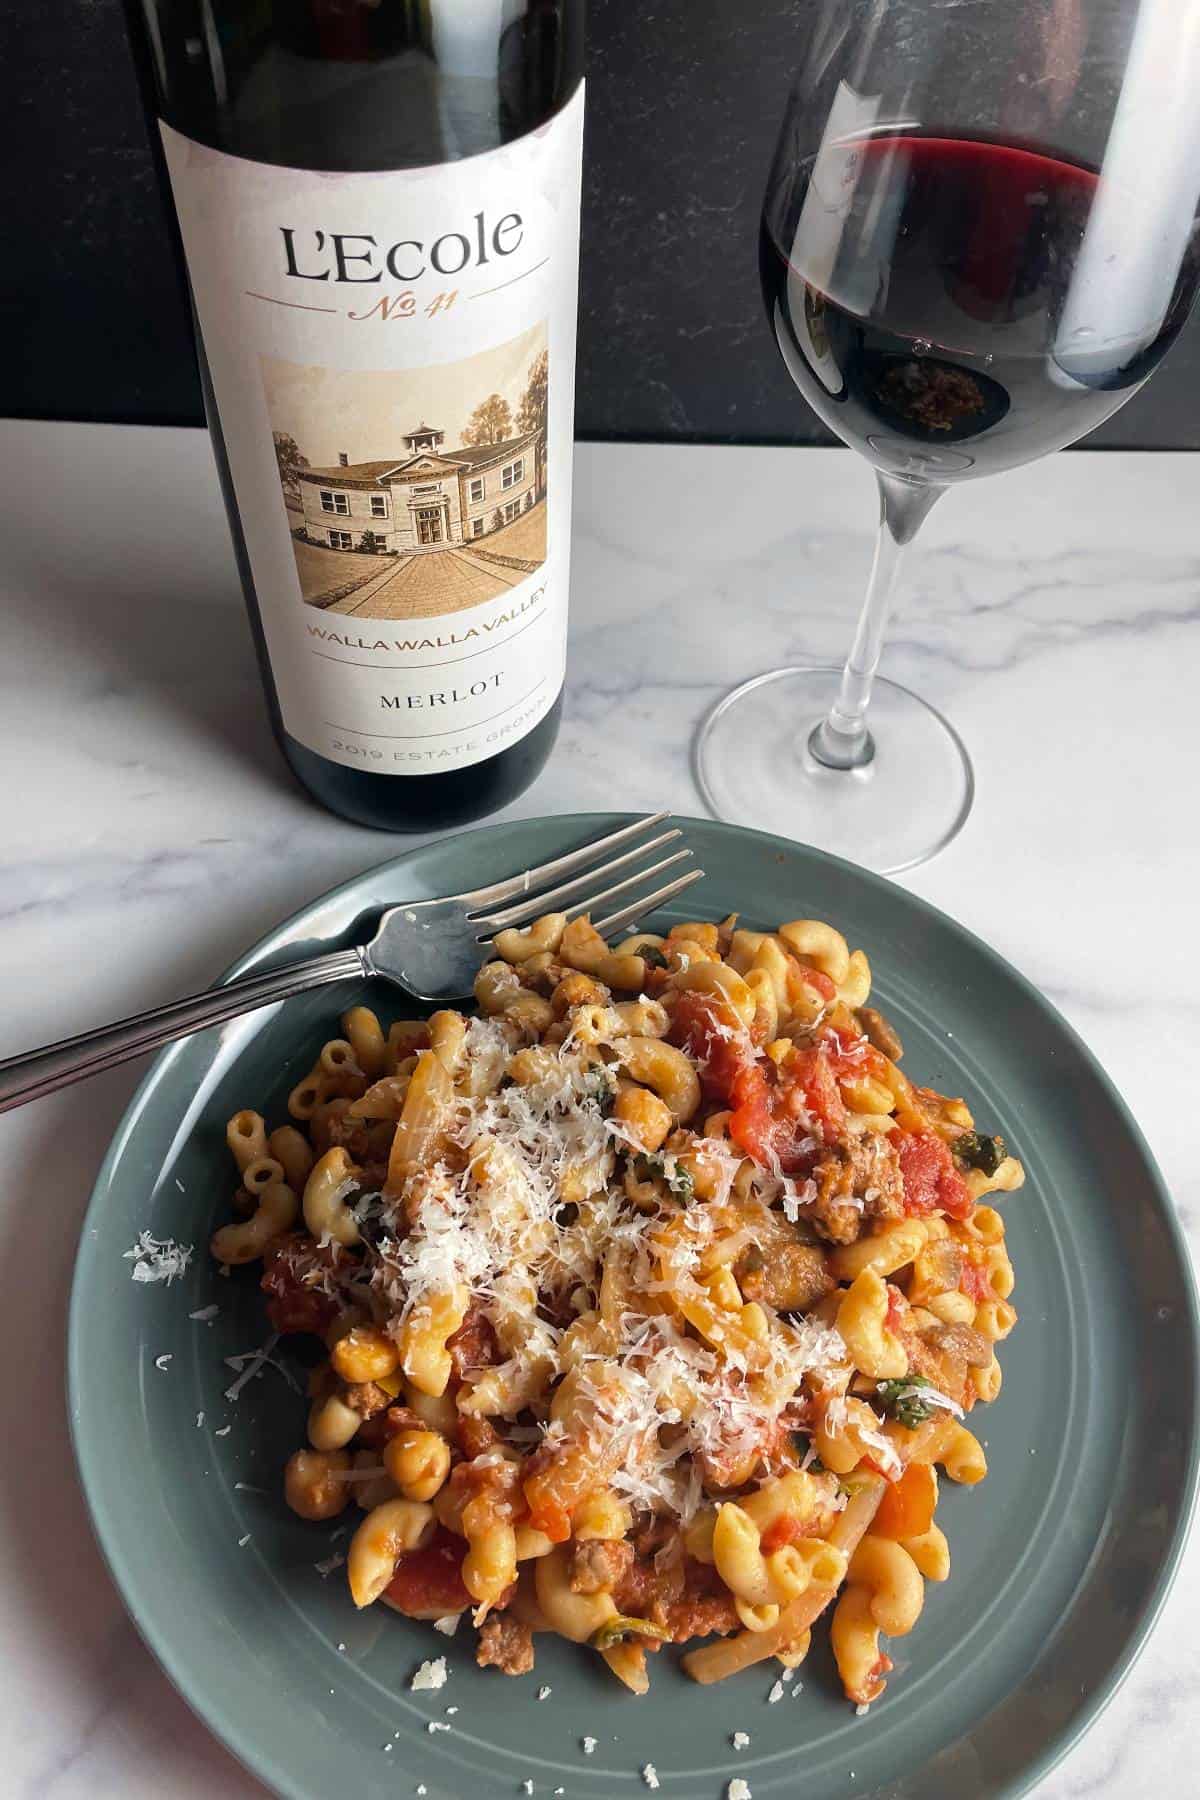 pasta sauce with ground beef and chickpeas served with a L'Ecole No. 41 Merlot.